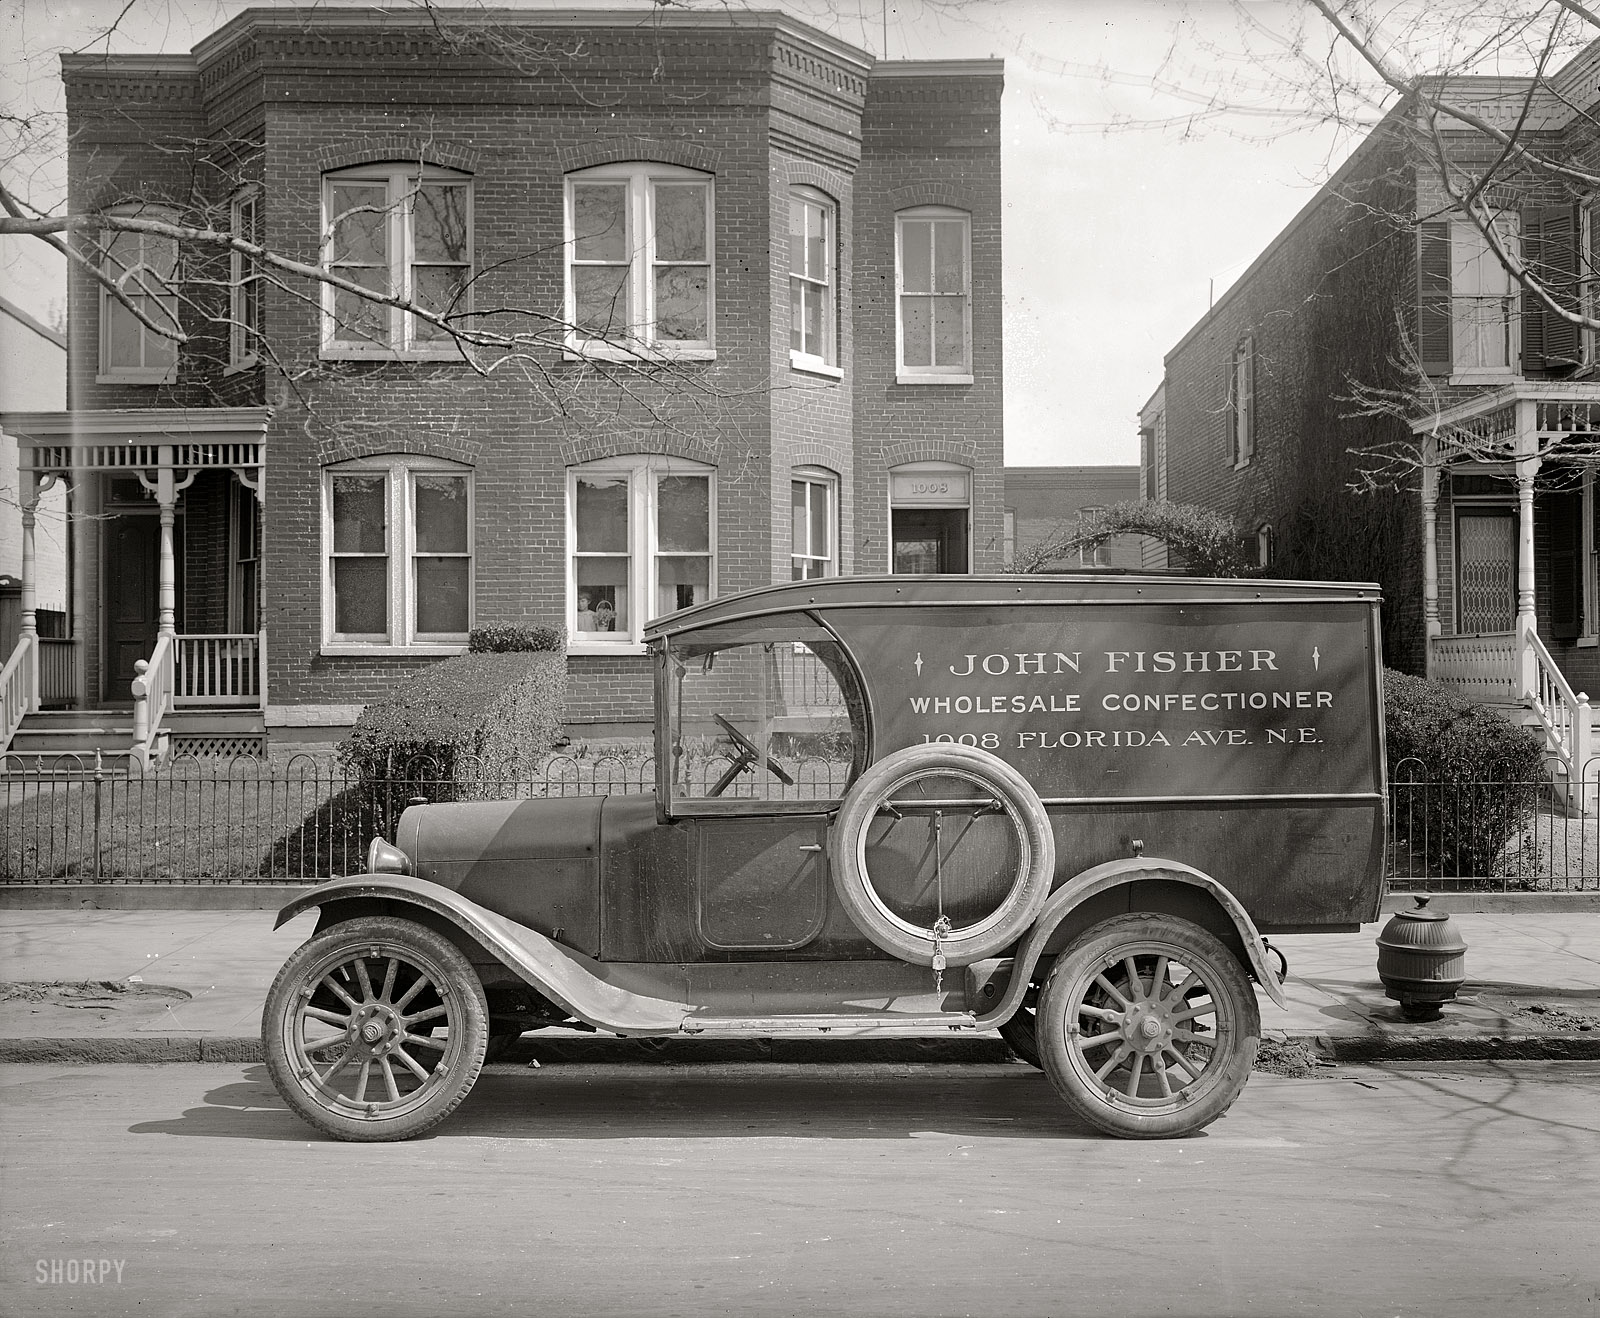 Washington circa 1926. "Semmes Motor Co. John Fisher truck." The more you look at this, the more you'll see. National Photo glass negative. View full size.